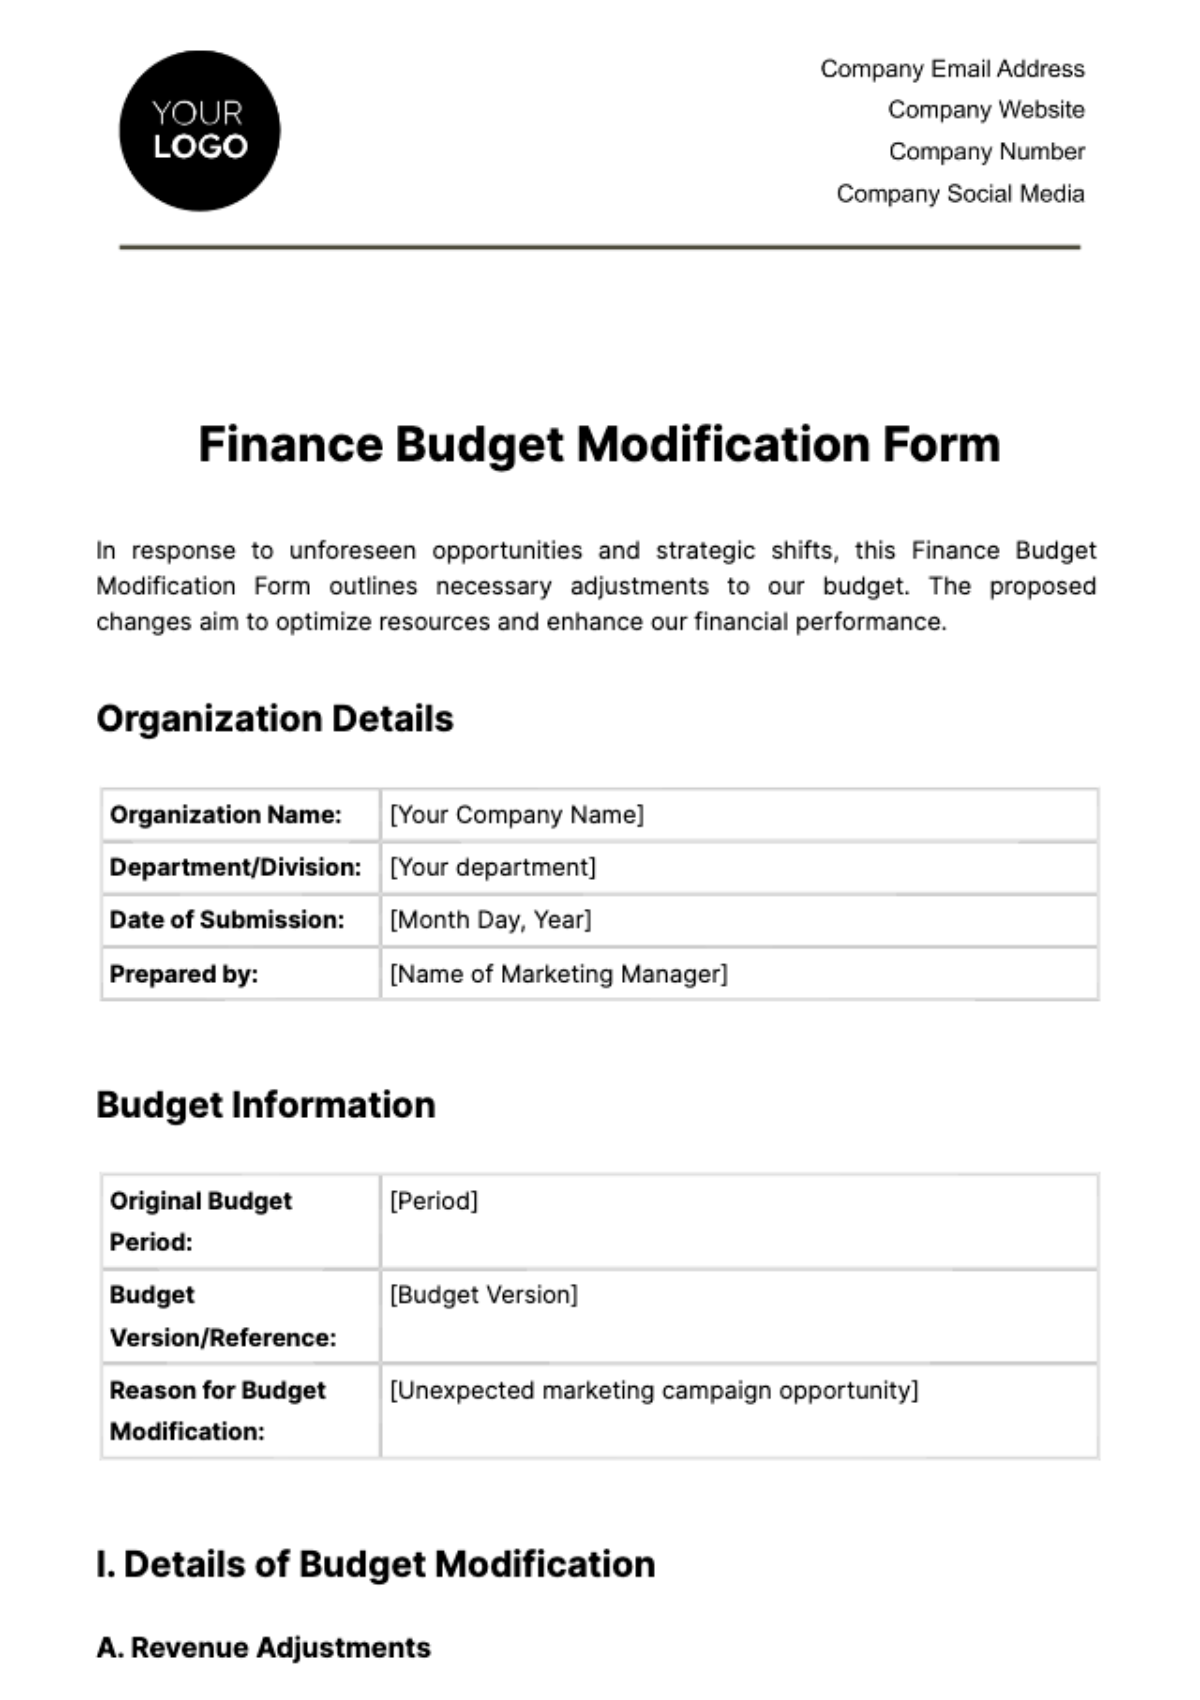 Free Finance Budget Modification Form Template